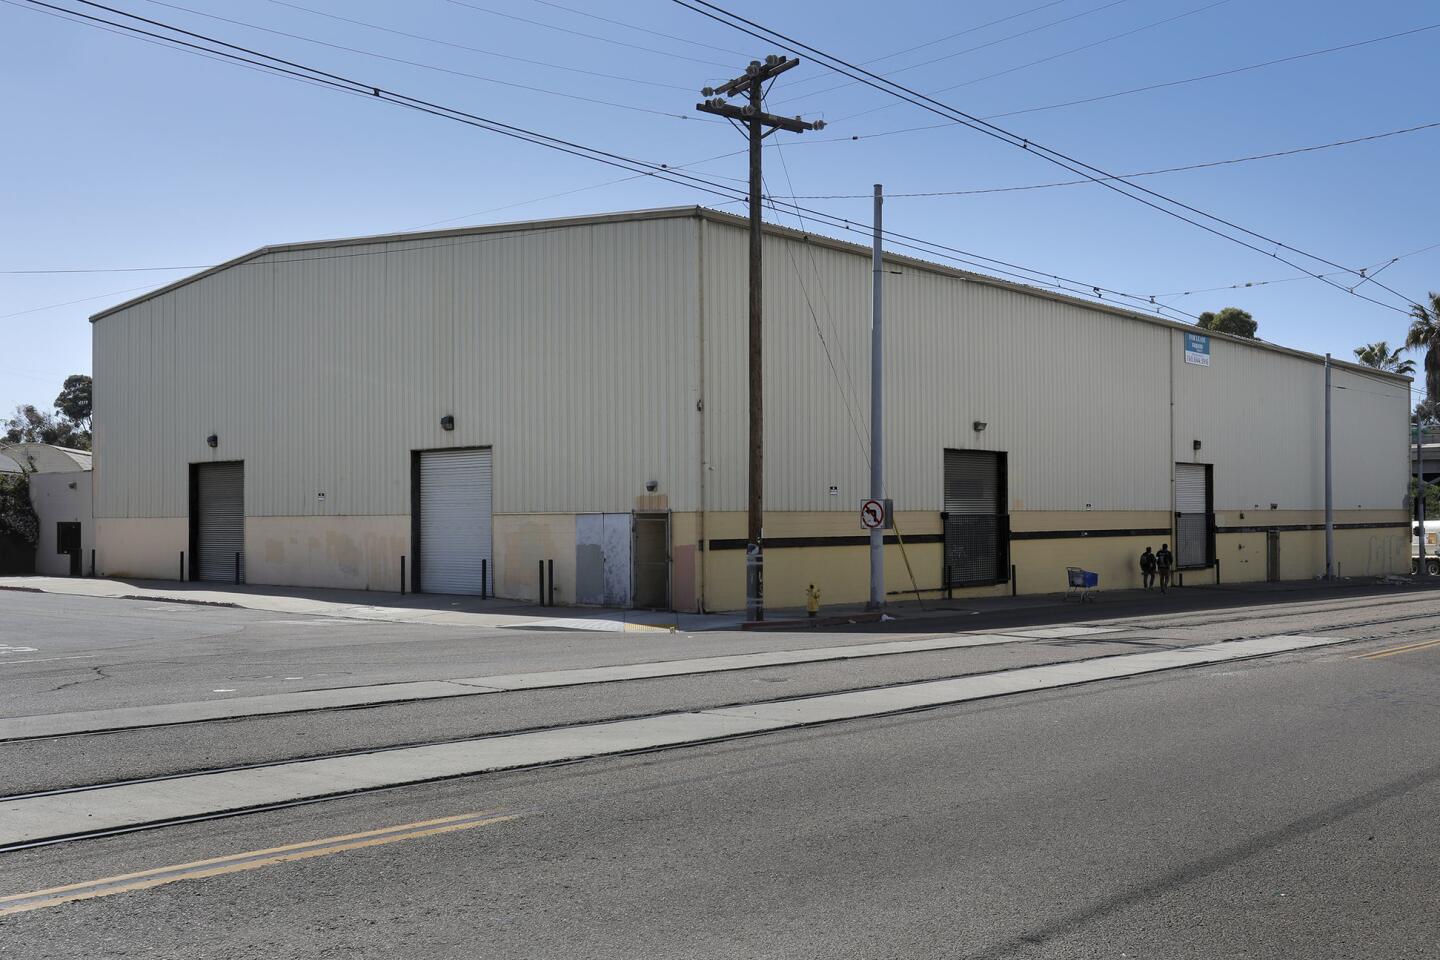 Business owners and residents concerned over proposed storage facility for homeless